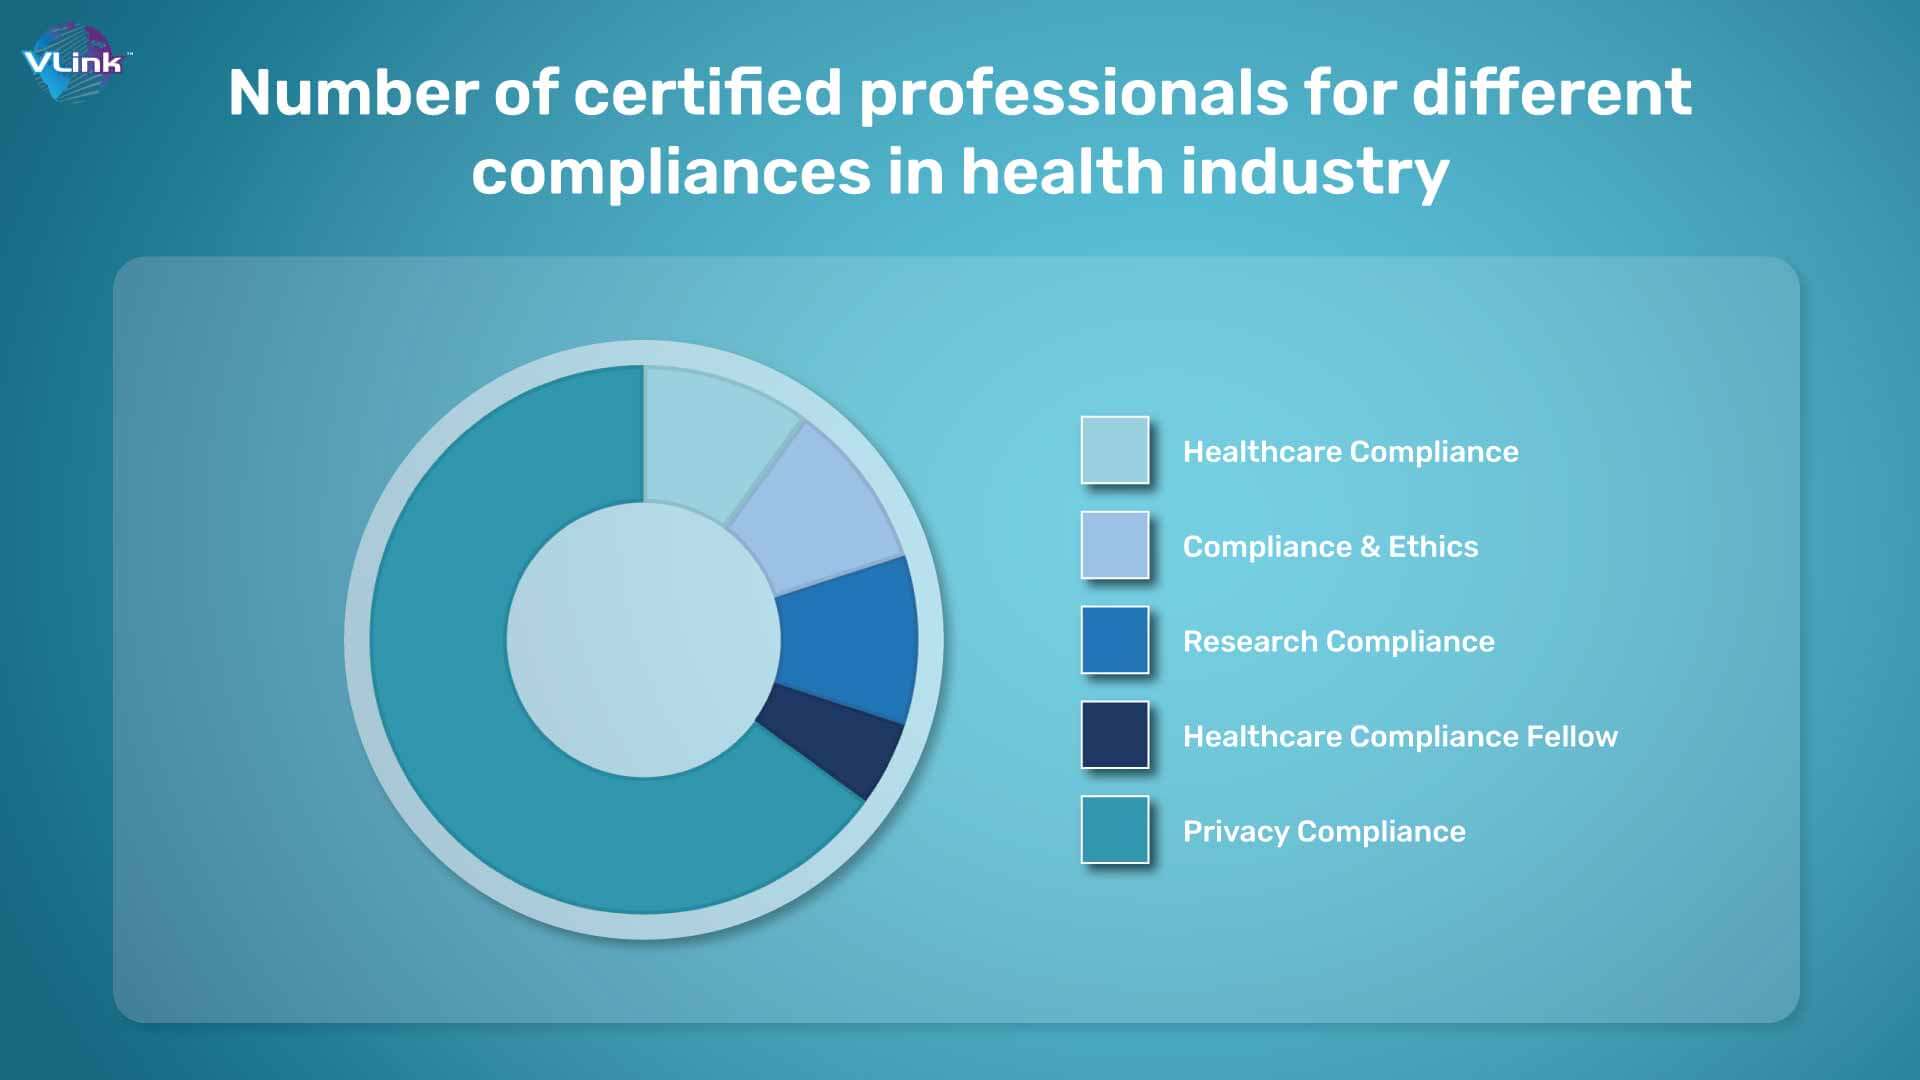 Number of certified professionals for different compliances in health industry